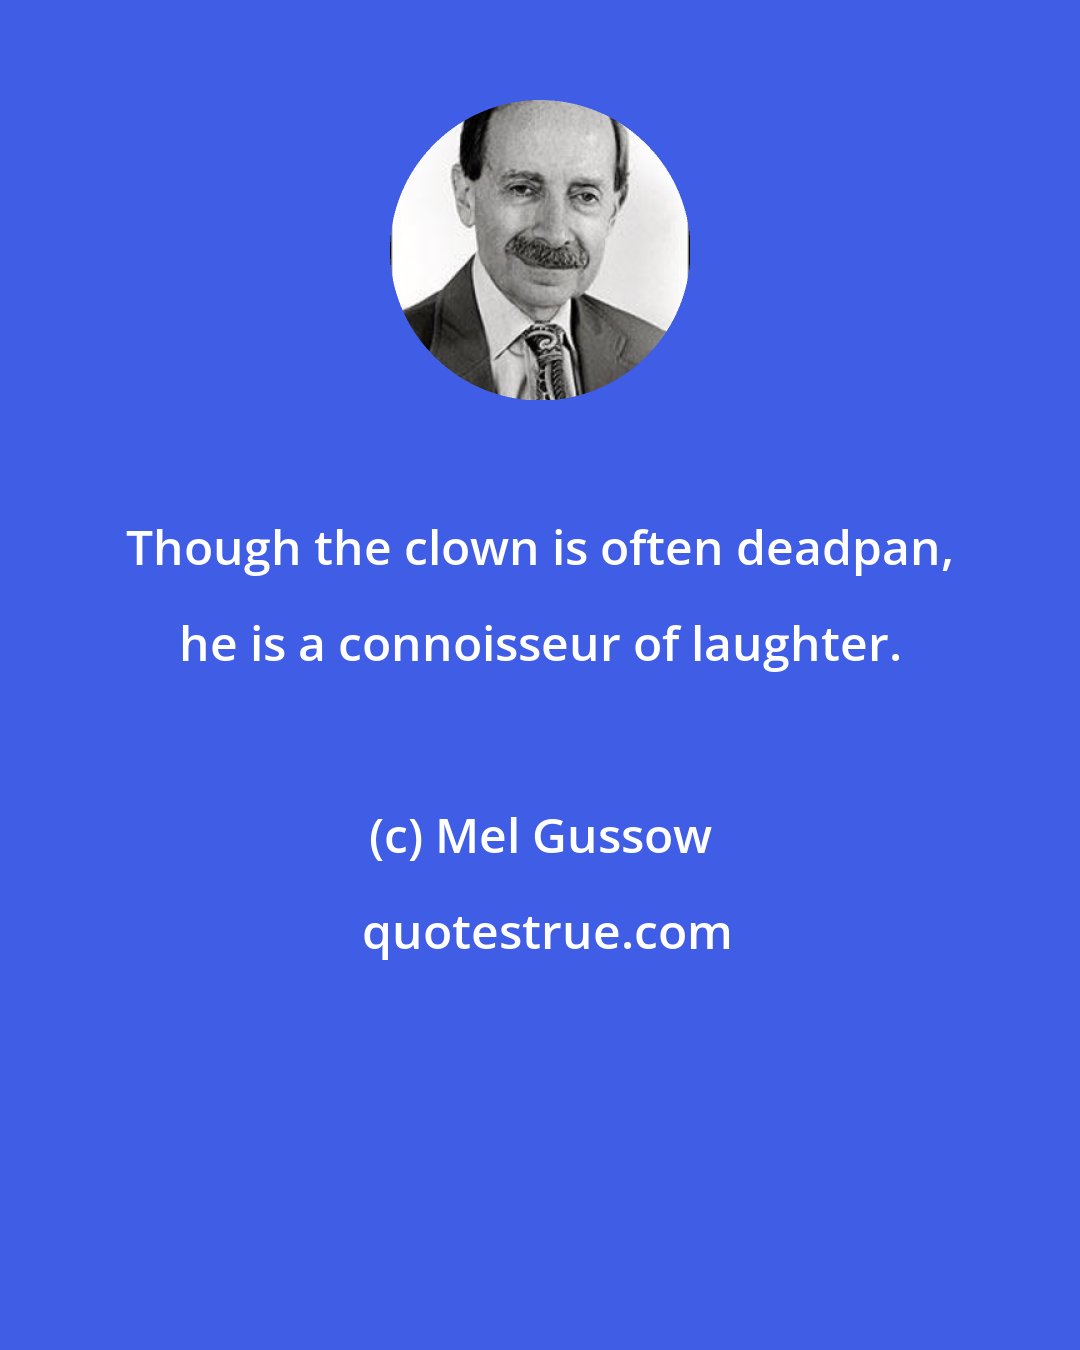 Mel Gussow: Though the clown is often deadpan, he is a connoisseur of laughter.